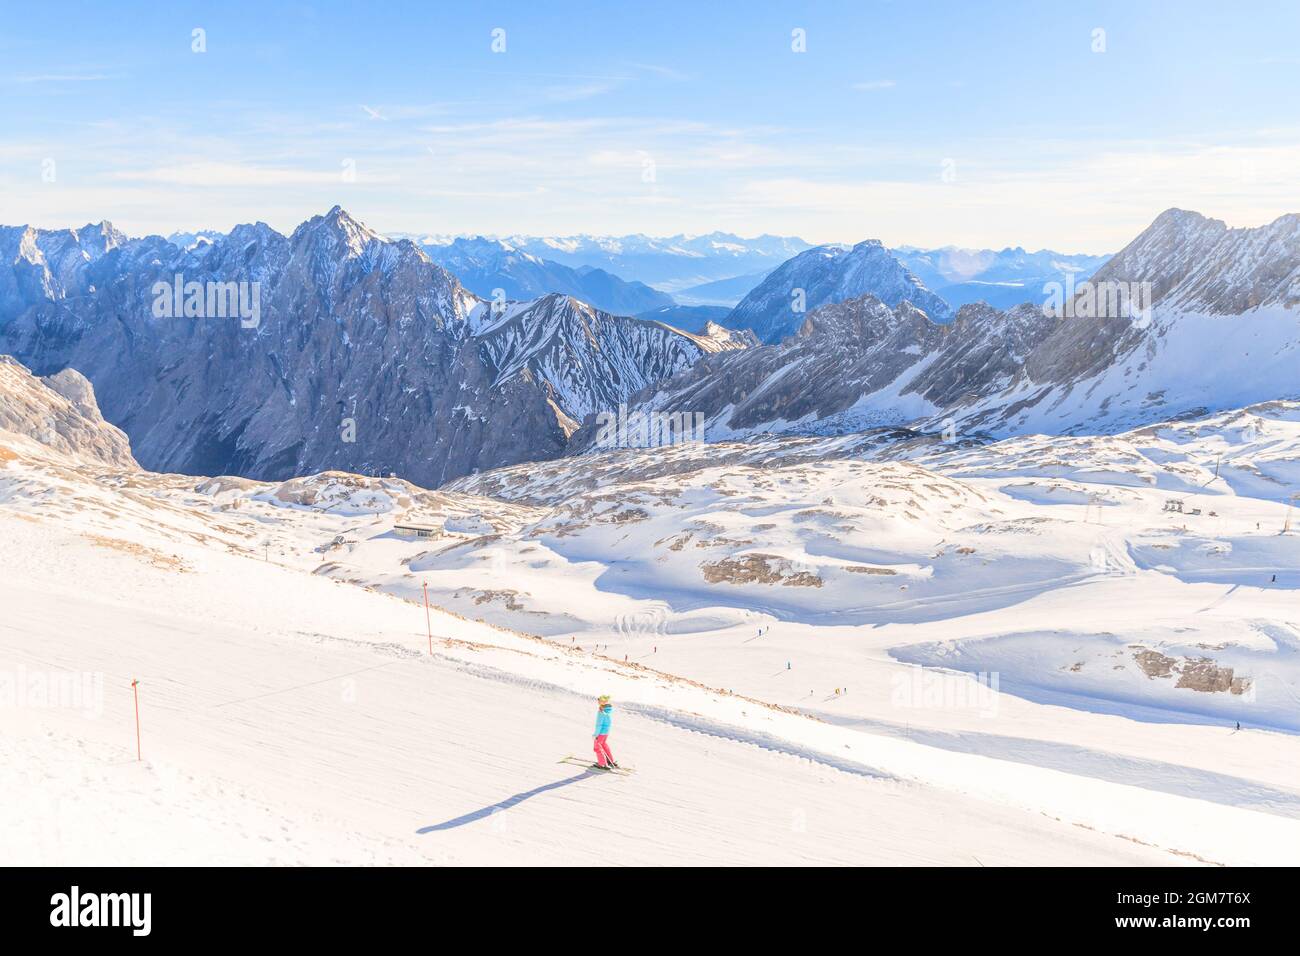 Zugspitze Glacier Ski Resort in Bavarian Alps, Germany. The Zugspitze, at 2,962 meters above sea level, is the highest mountain in Germany Stock Photo